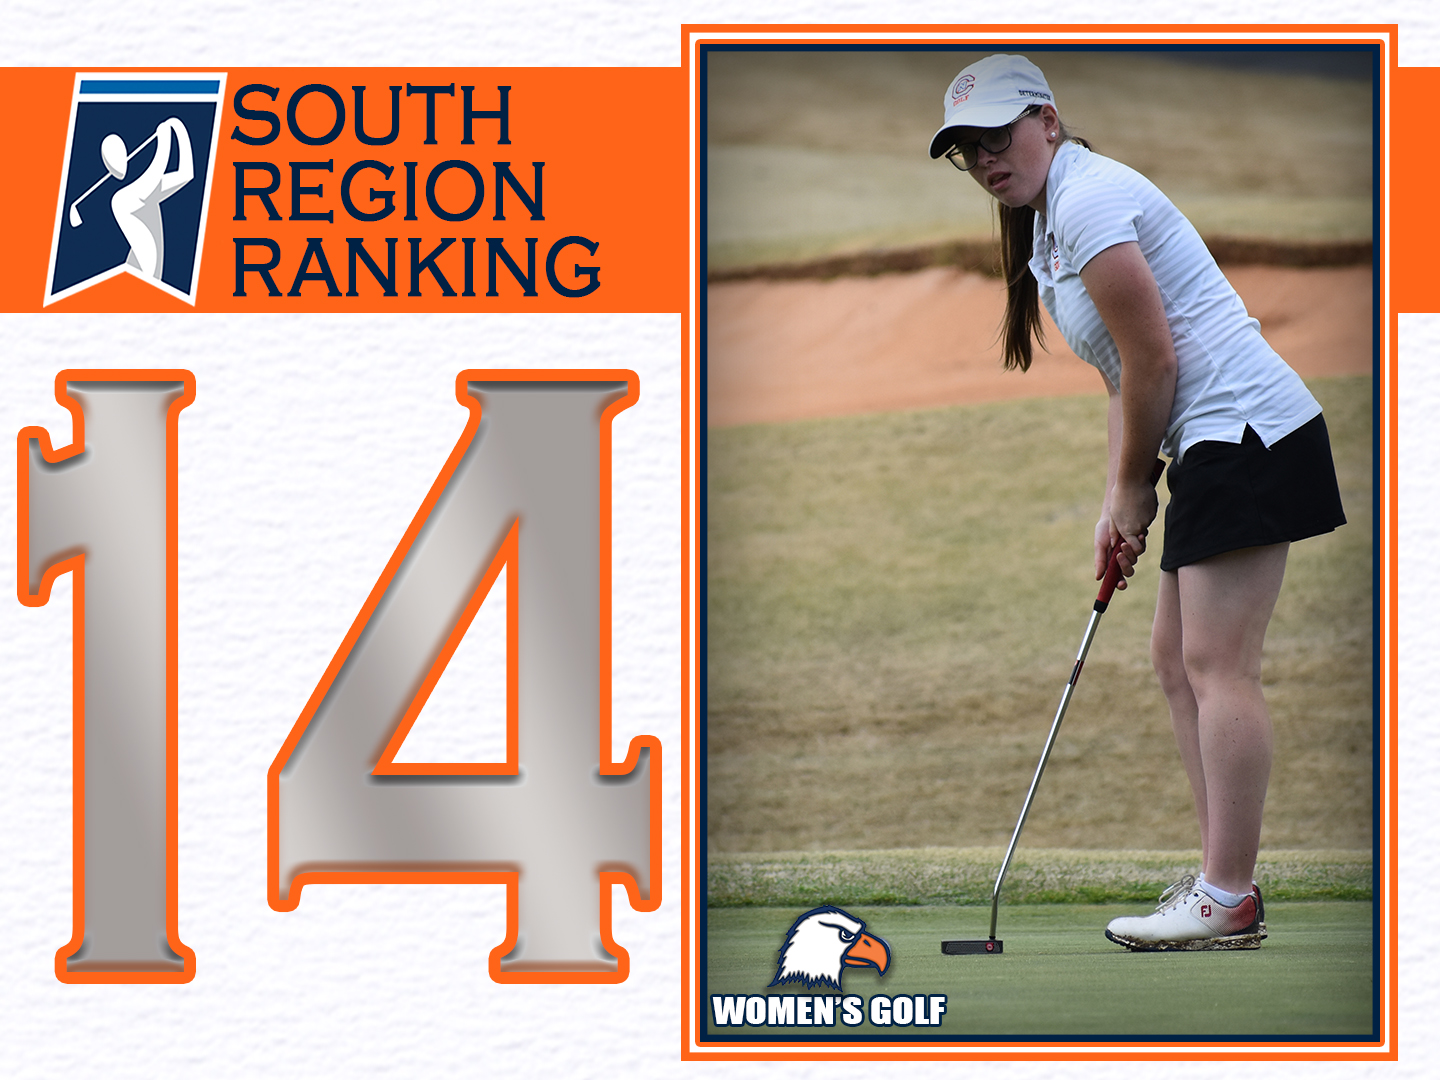 Eagles hold steady at No. 14 in the South Regional rankings